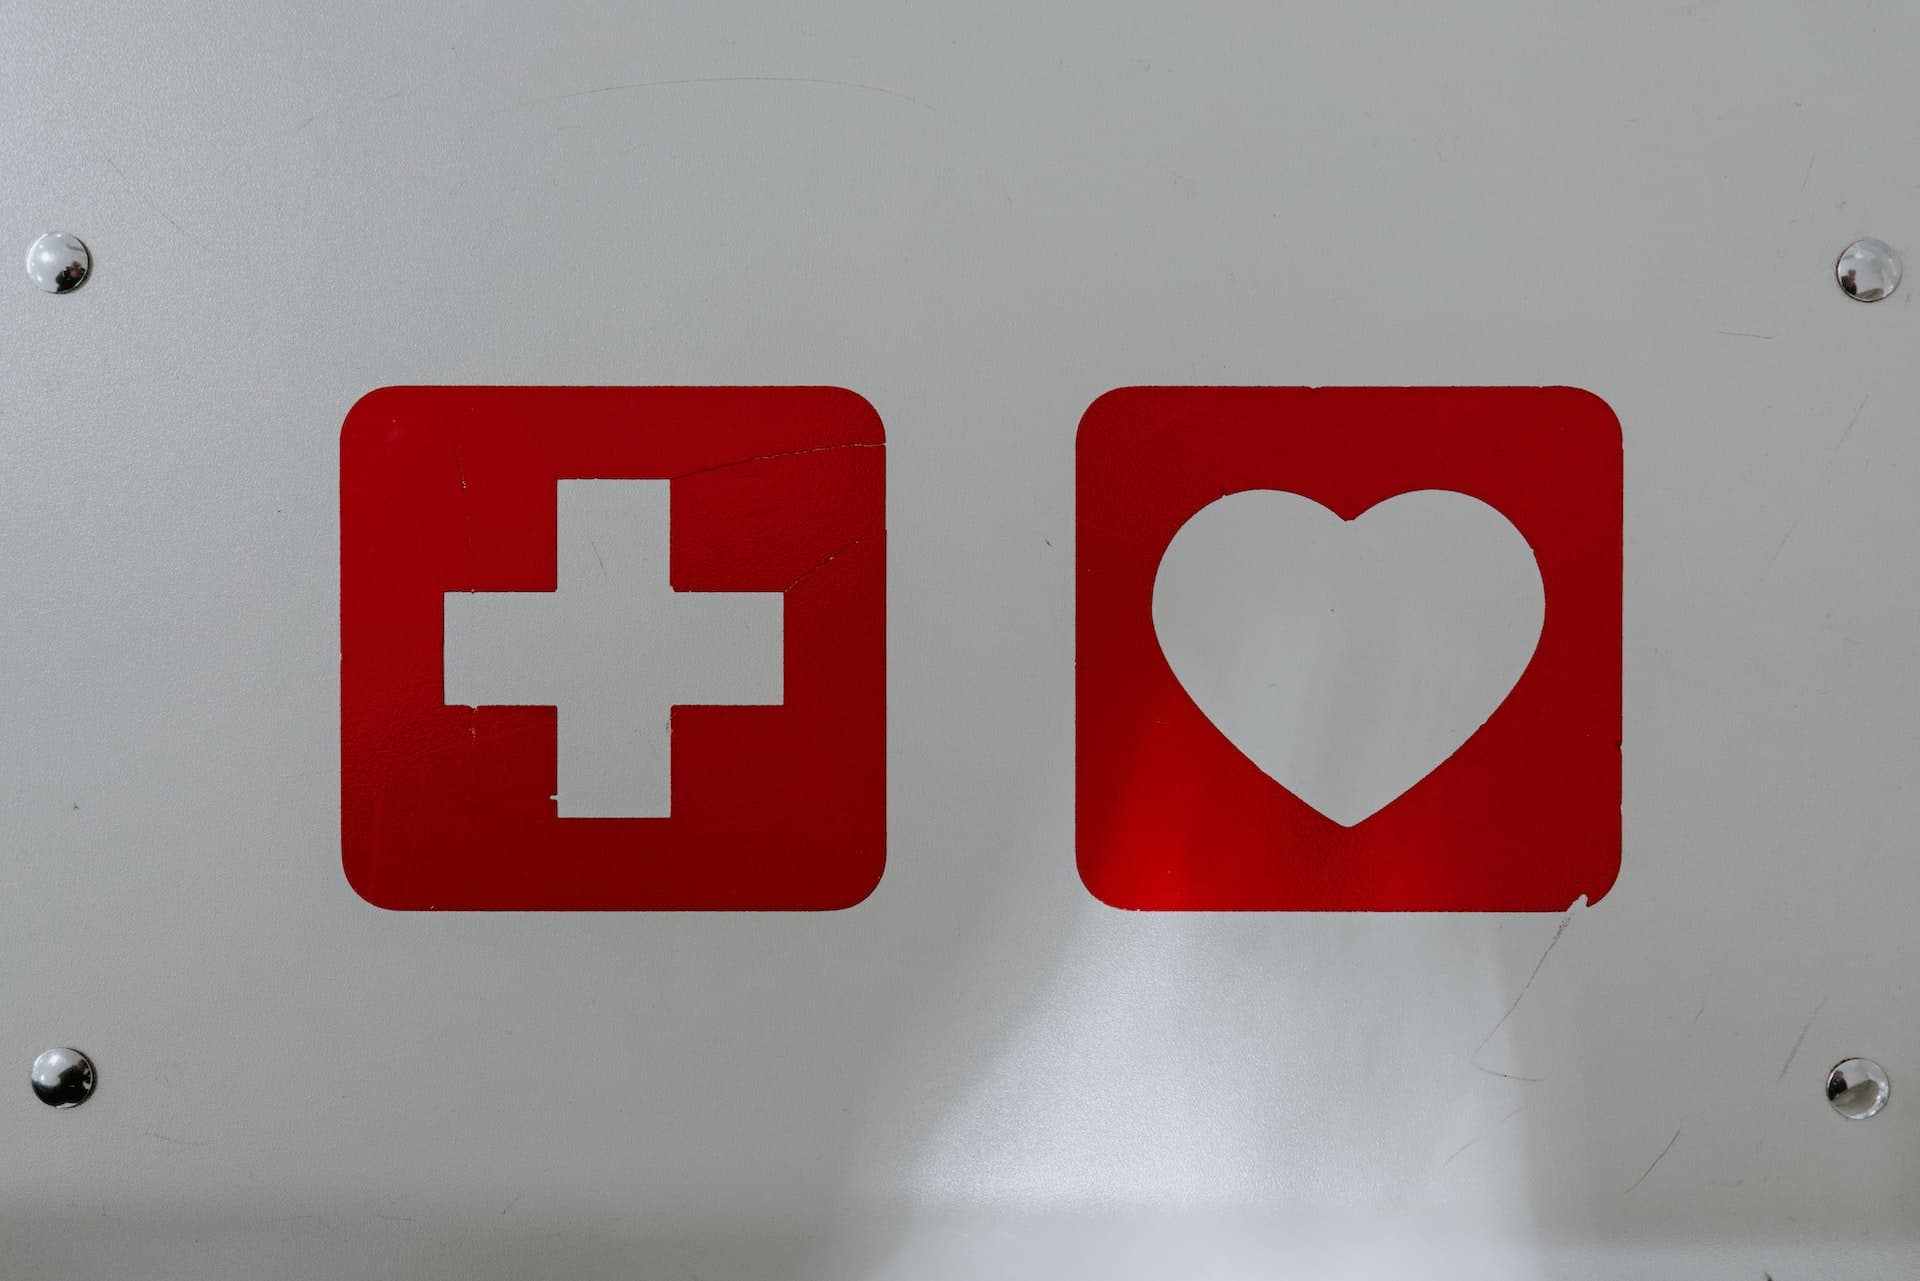 red cross and red heart on white wall